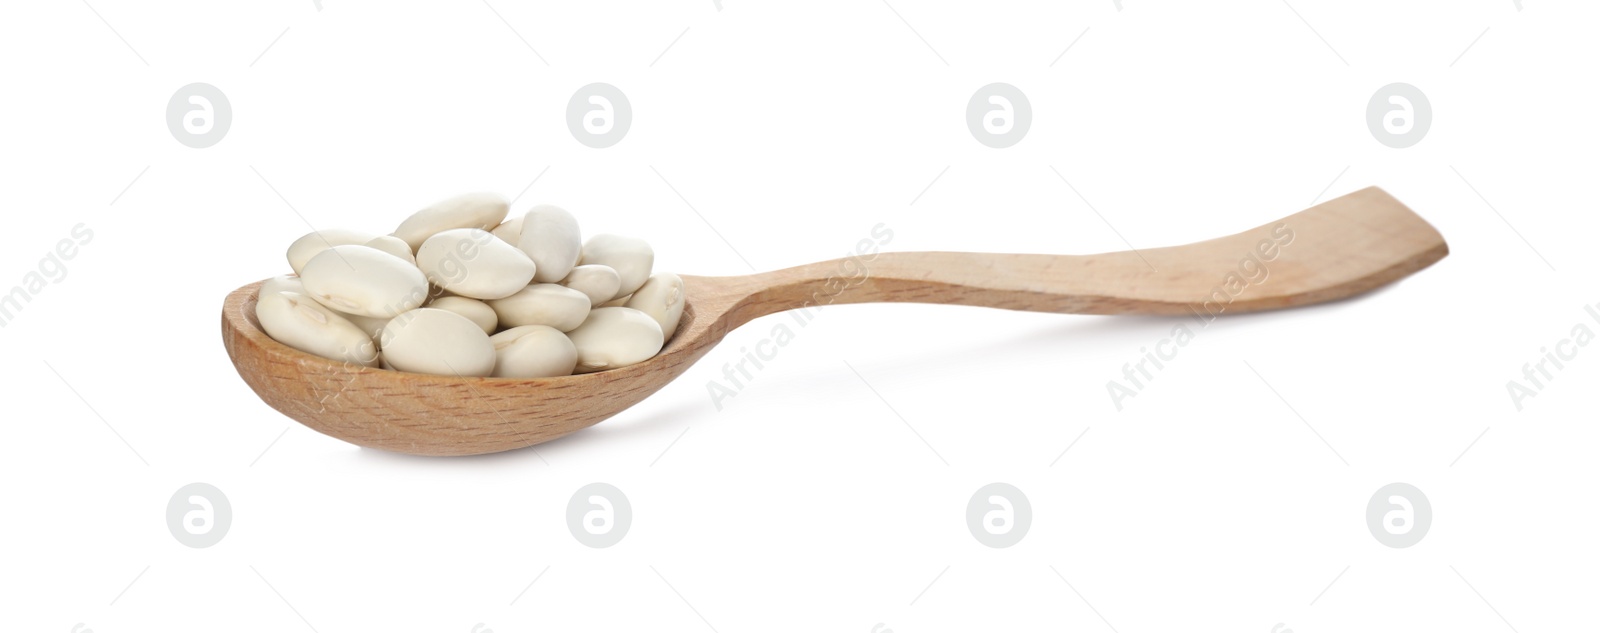 Photo of Spoon with uncooked navy beans on white background